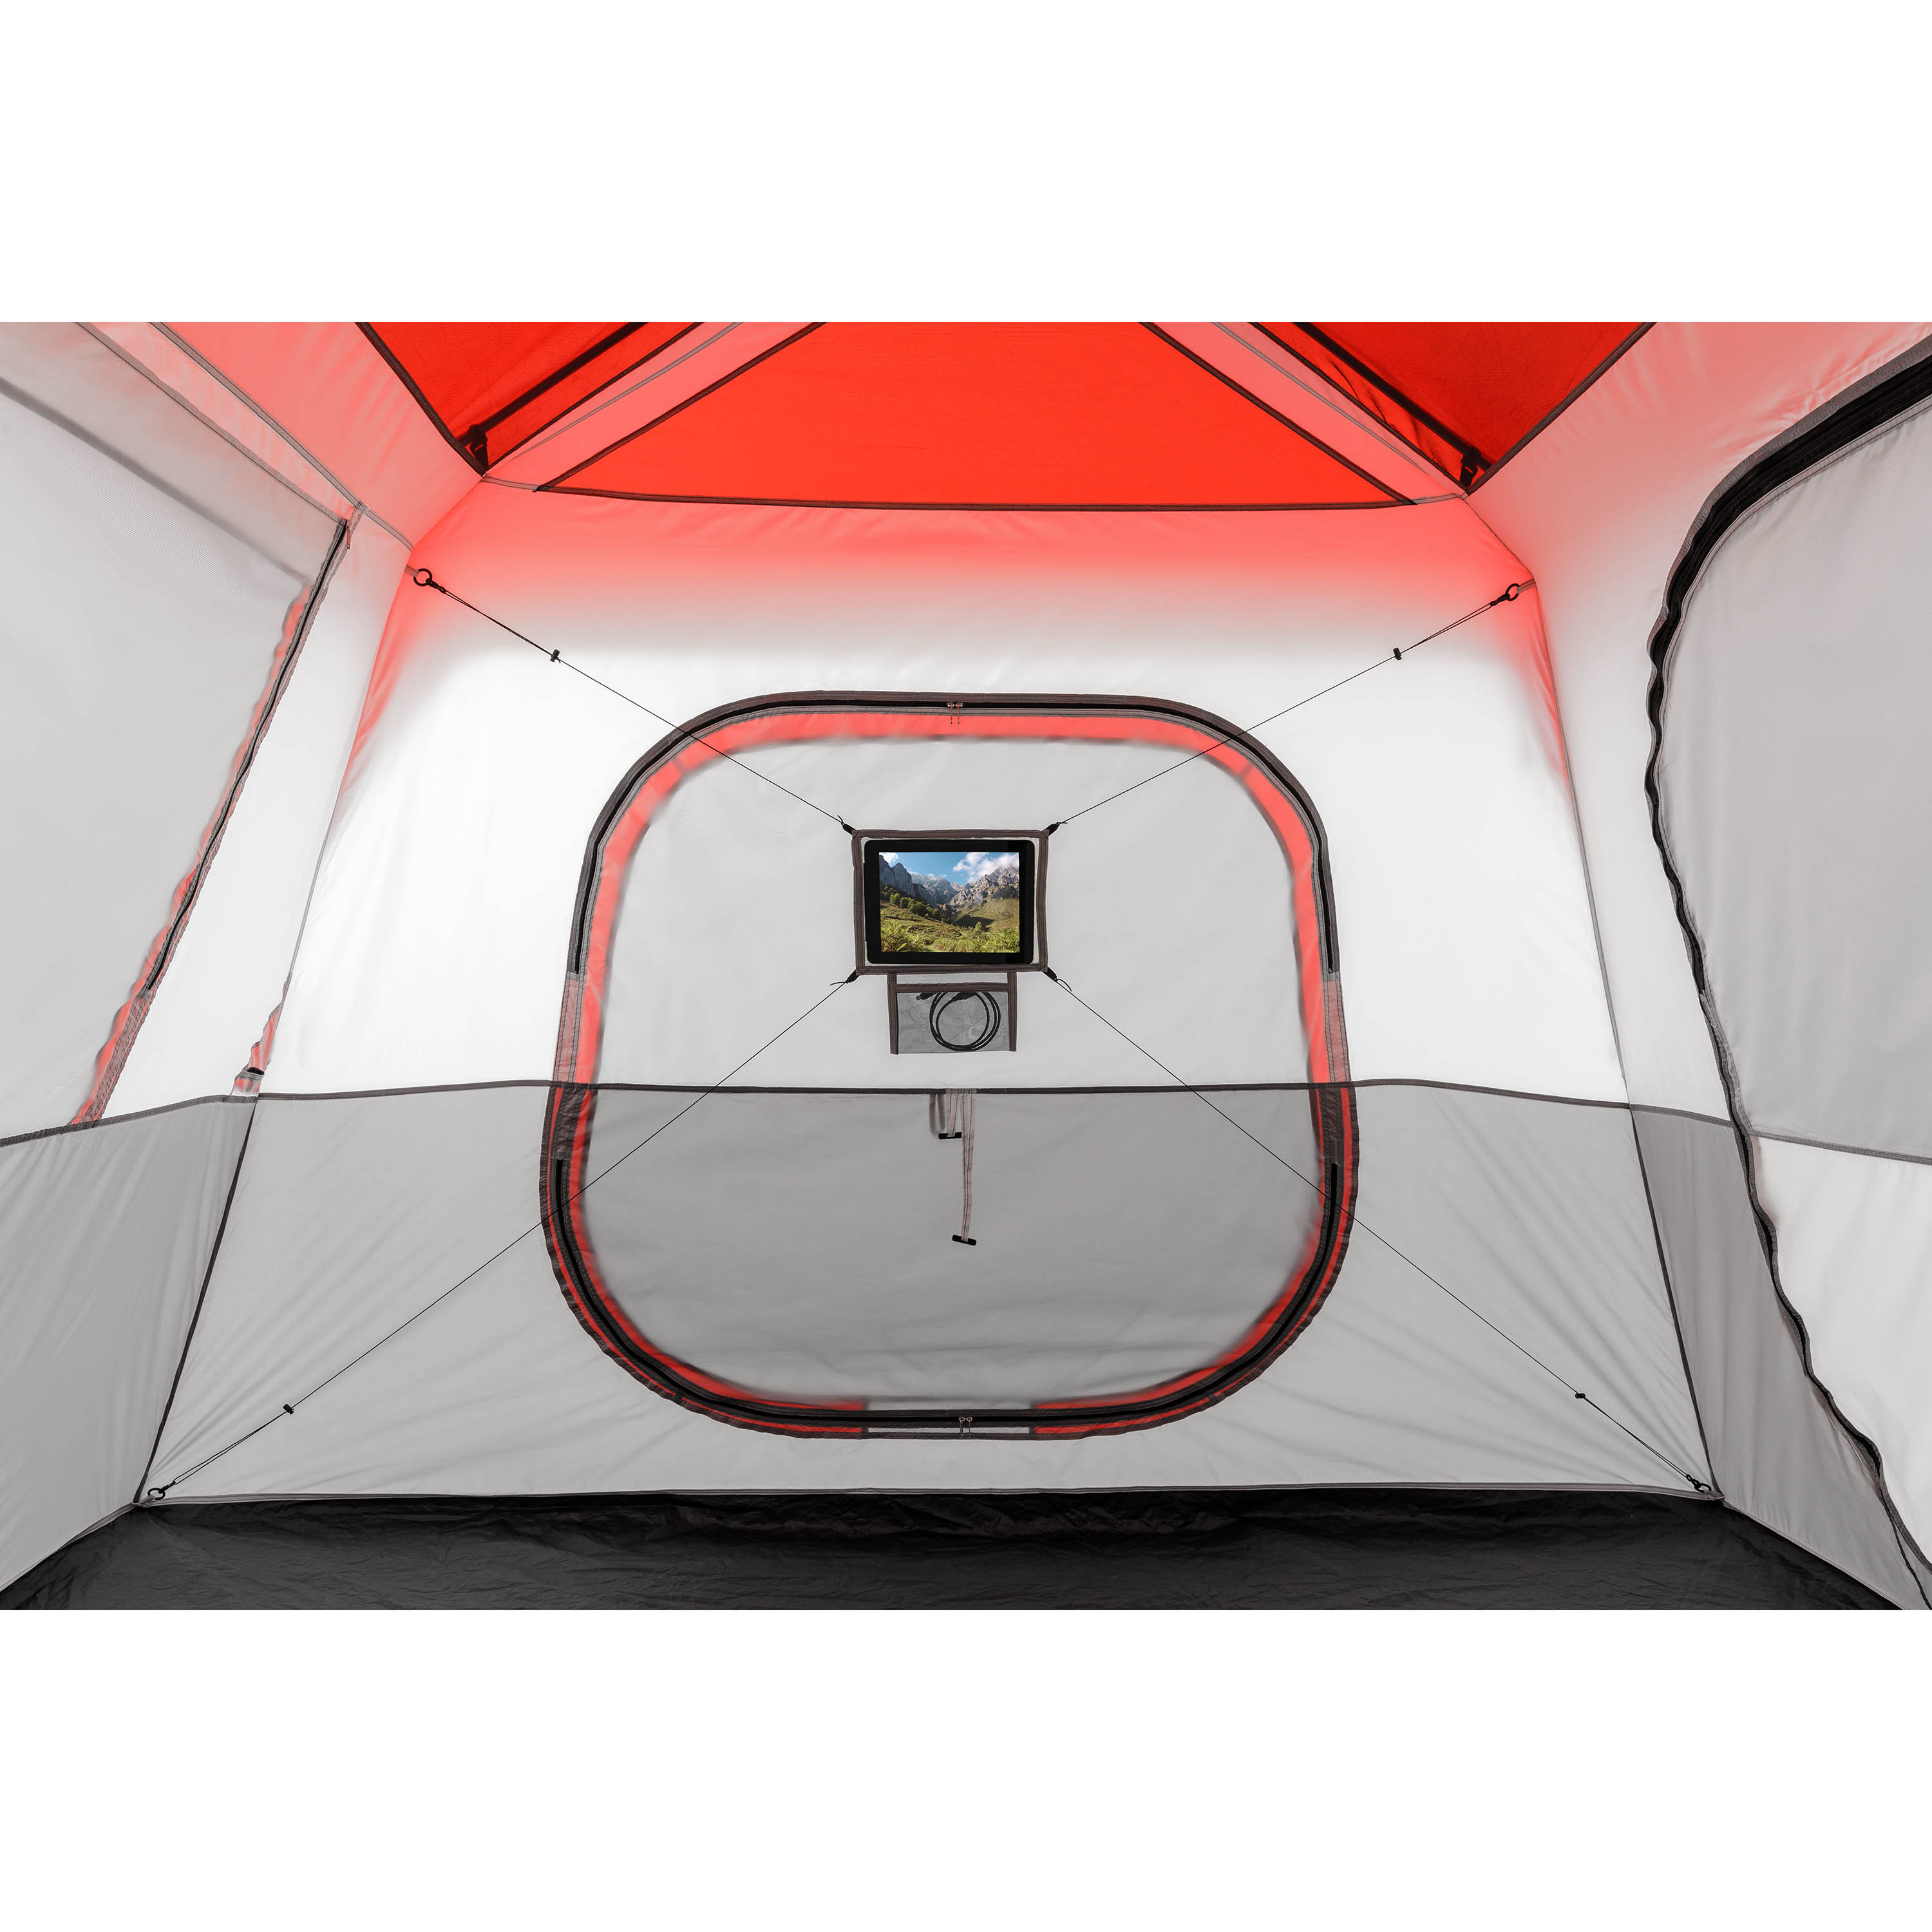 Ozark Trail 13' x 9' 8-Person Instant Cabin Tent with LED Lights, 36.9274 lbs - image 5 of 11